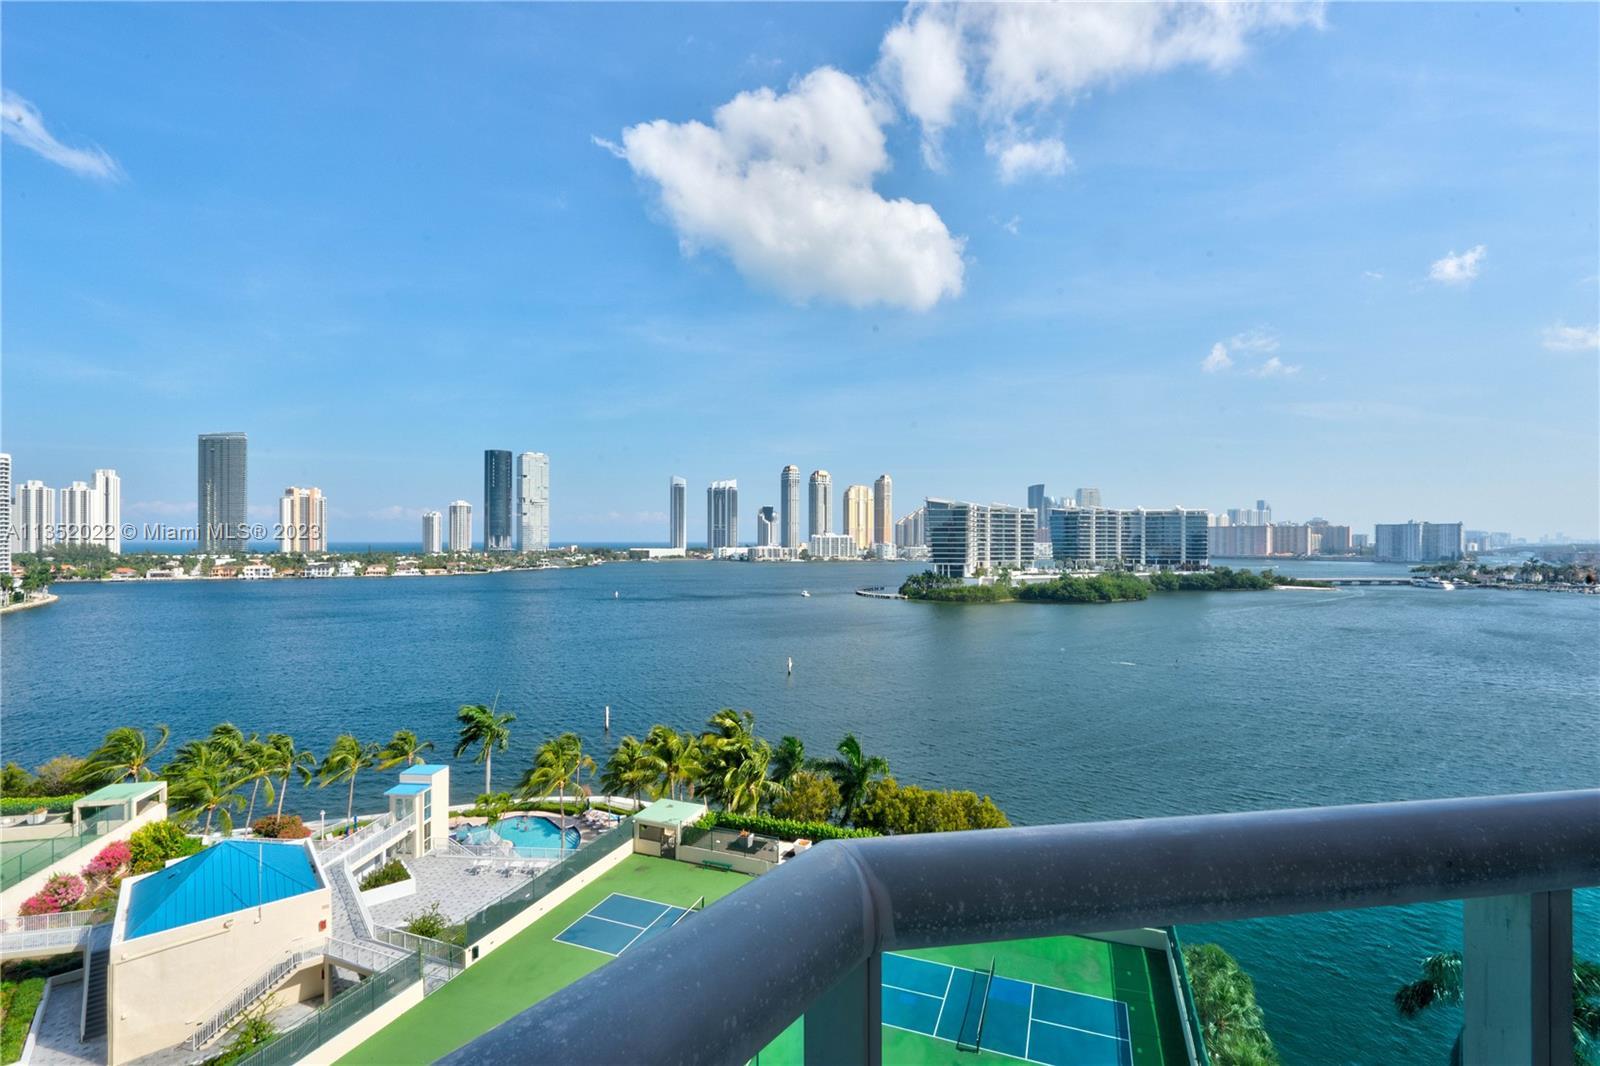 Introducing a stunning 2 bedroom 3 bathroom apartment with breathtaking views of the intercoastal an